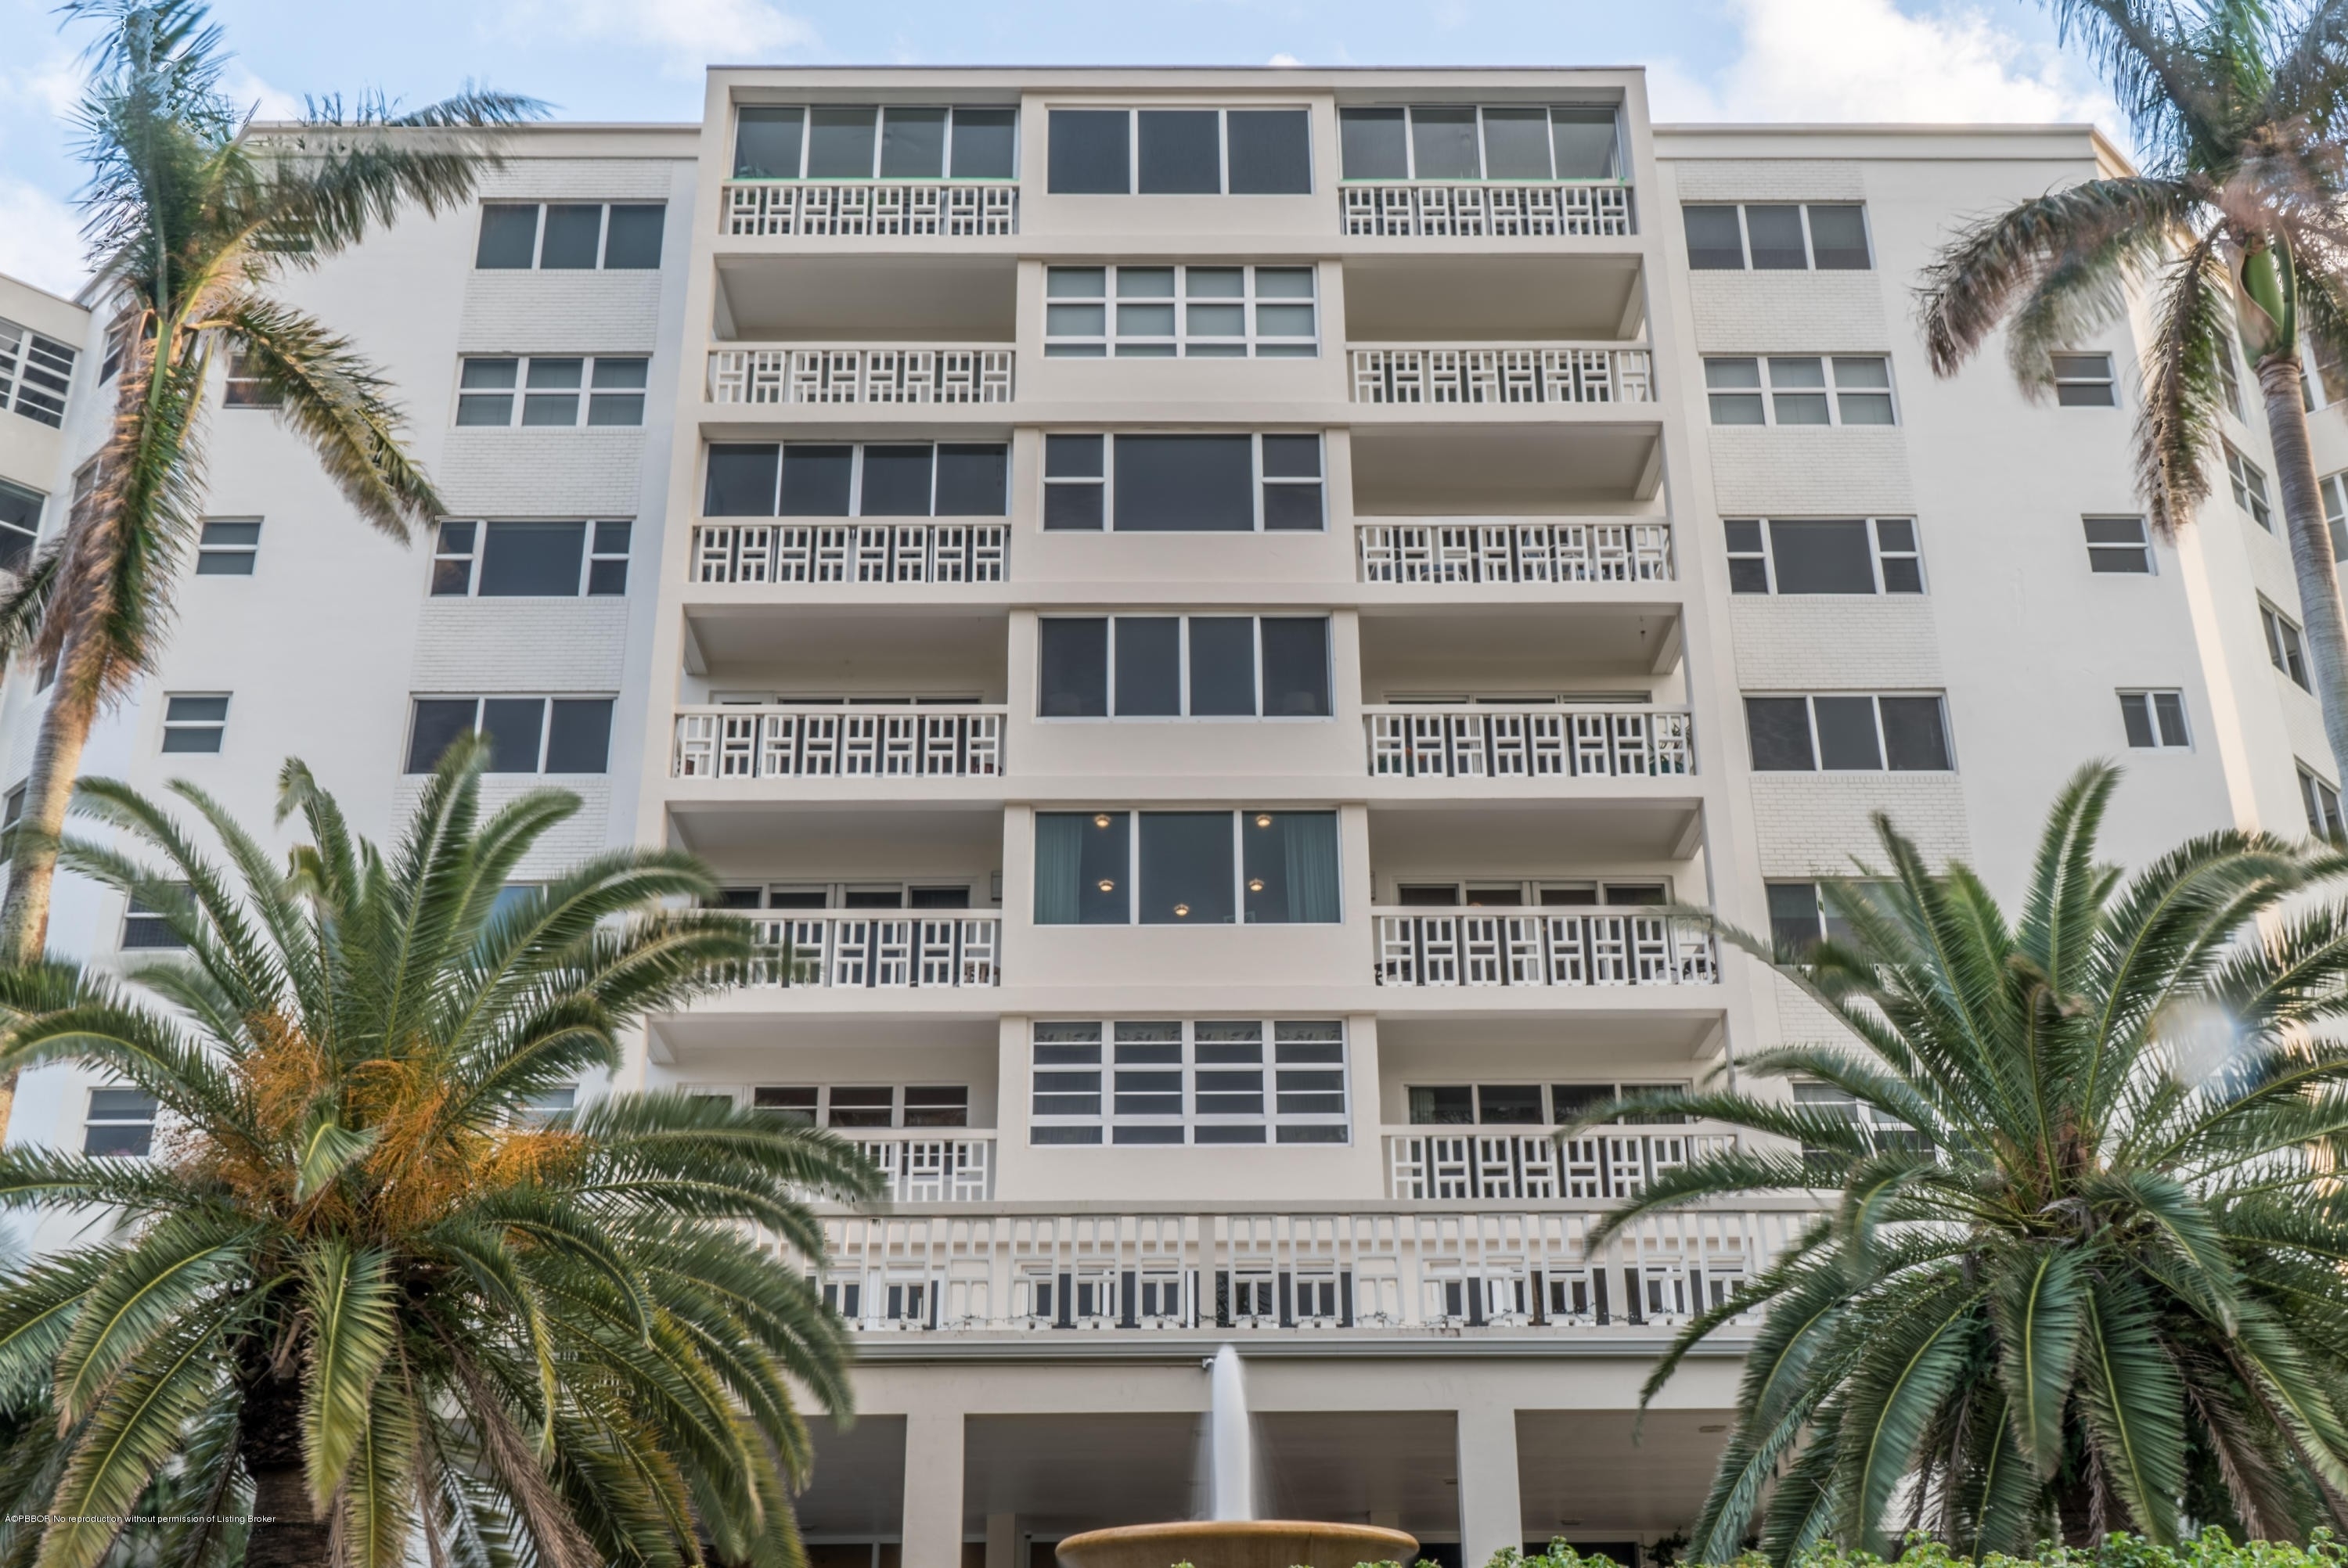 Property at 1000 Lowry Street, 1F Delray Beach